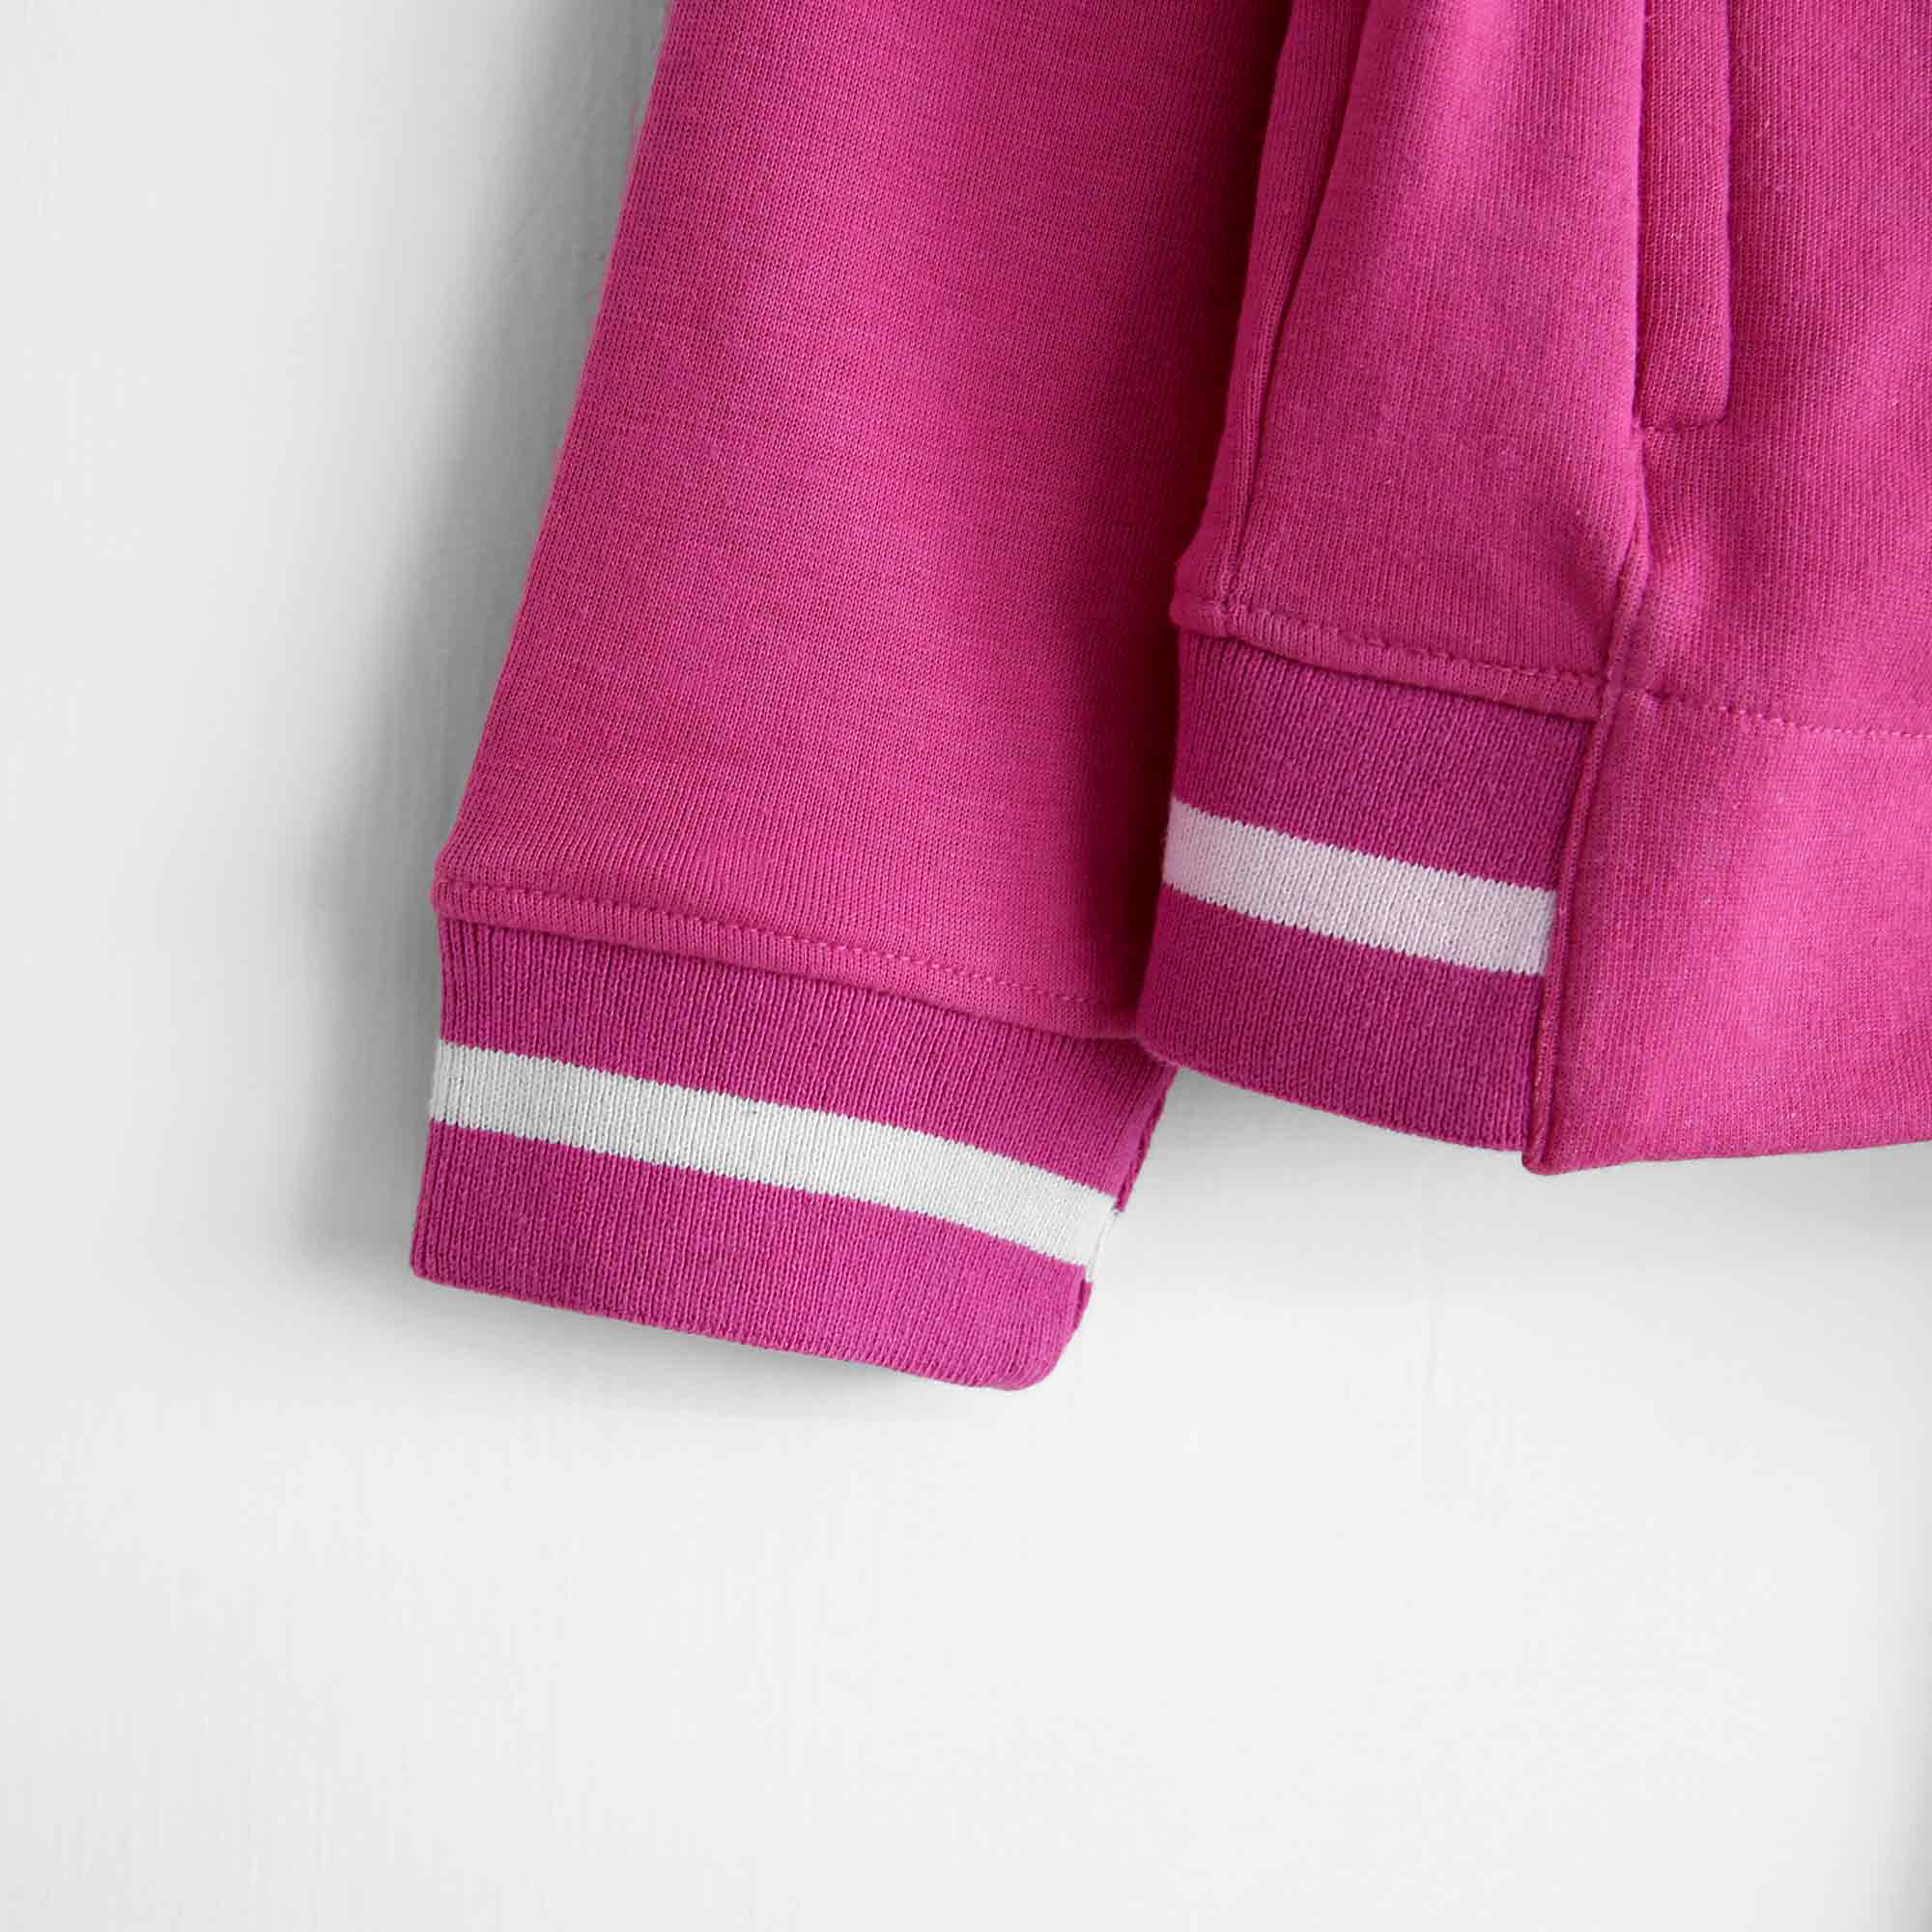 Premium Quality Slim Fit Pink Tracksuit For Girls - Brands River